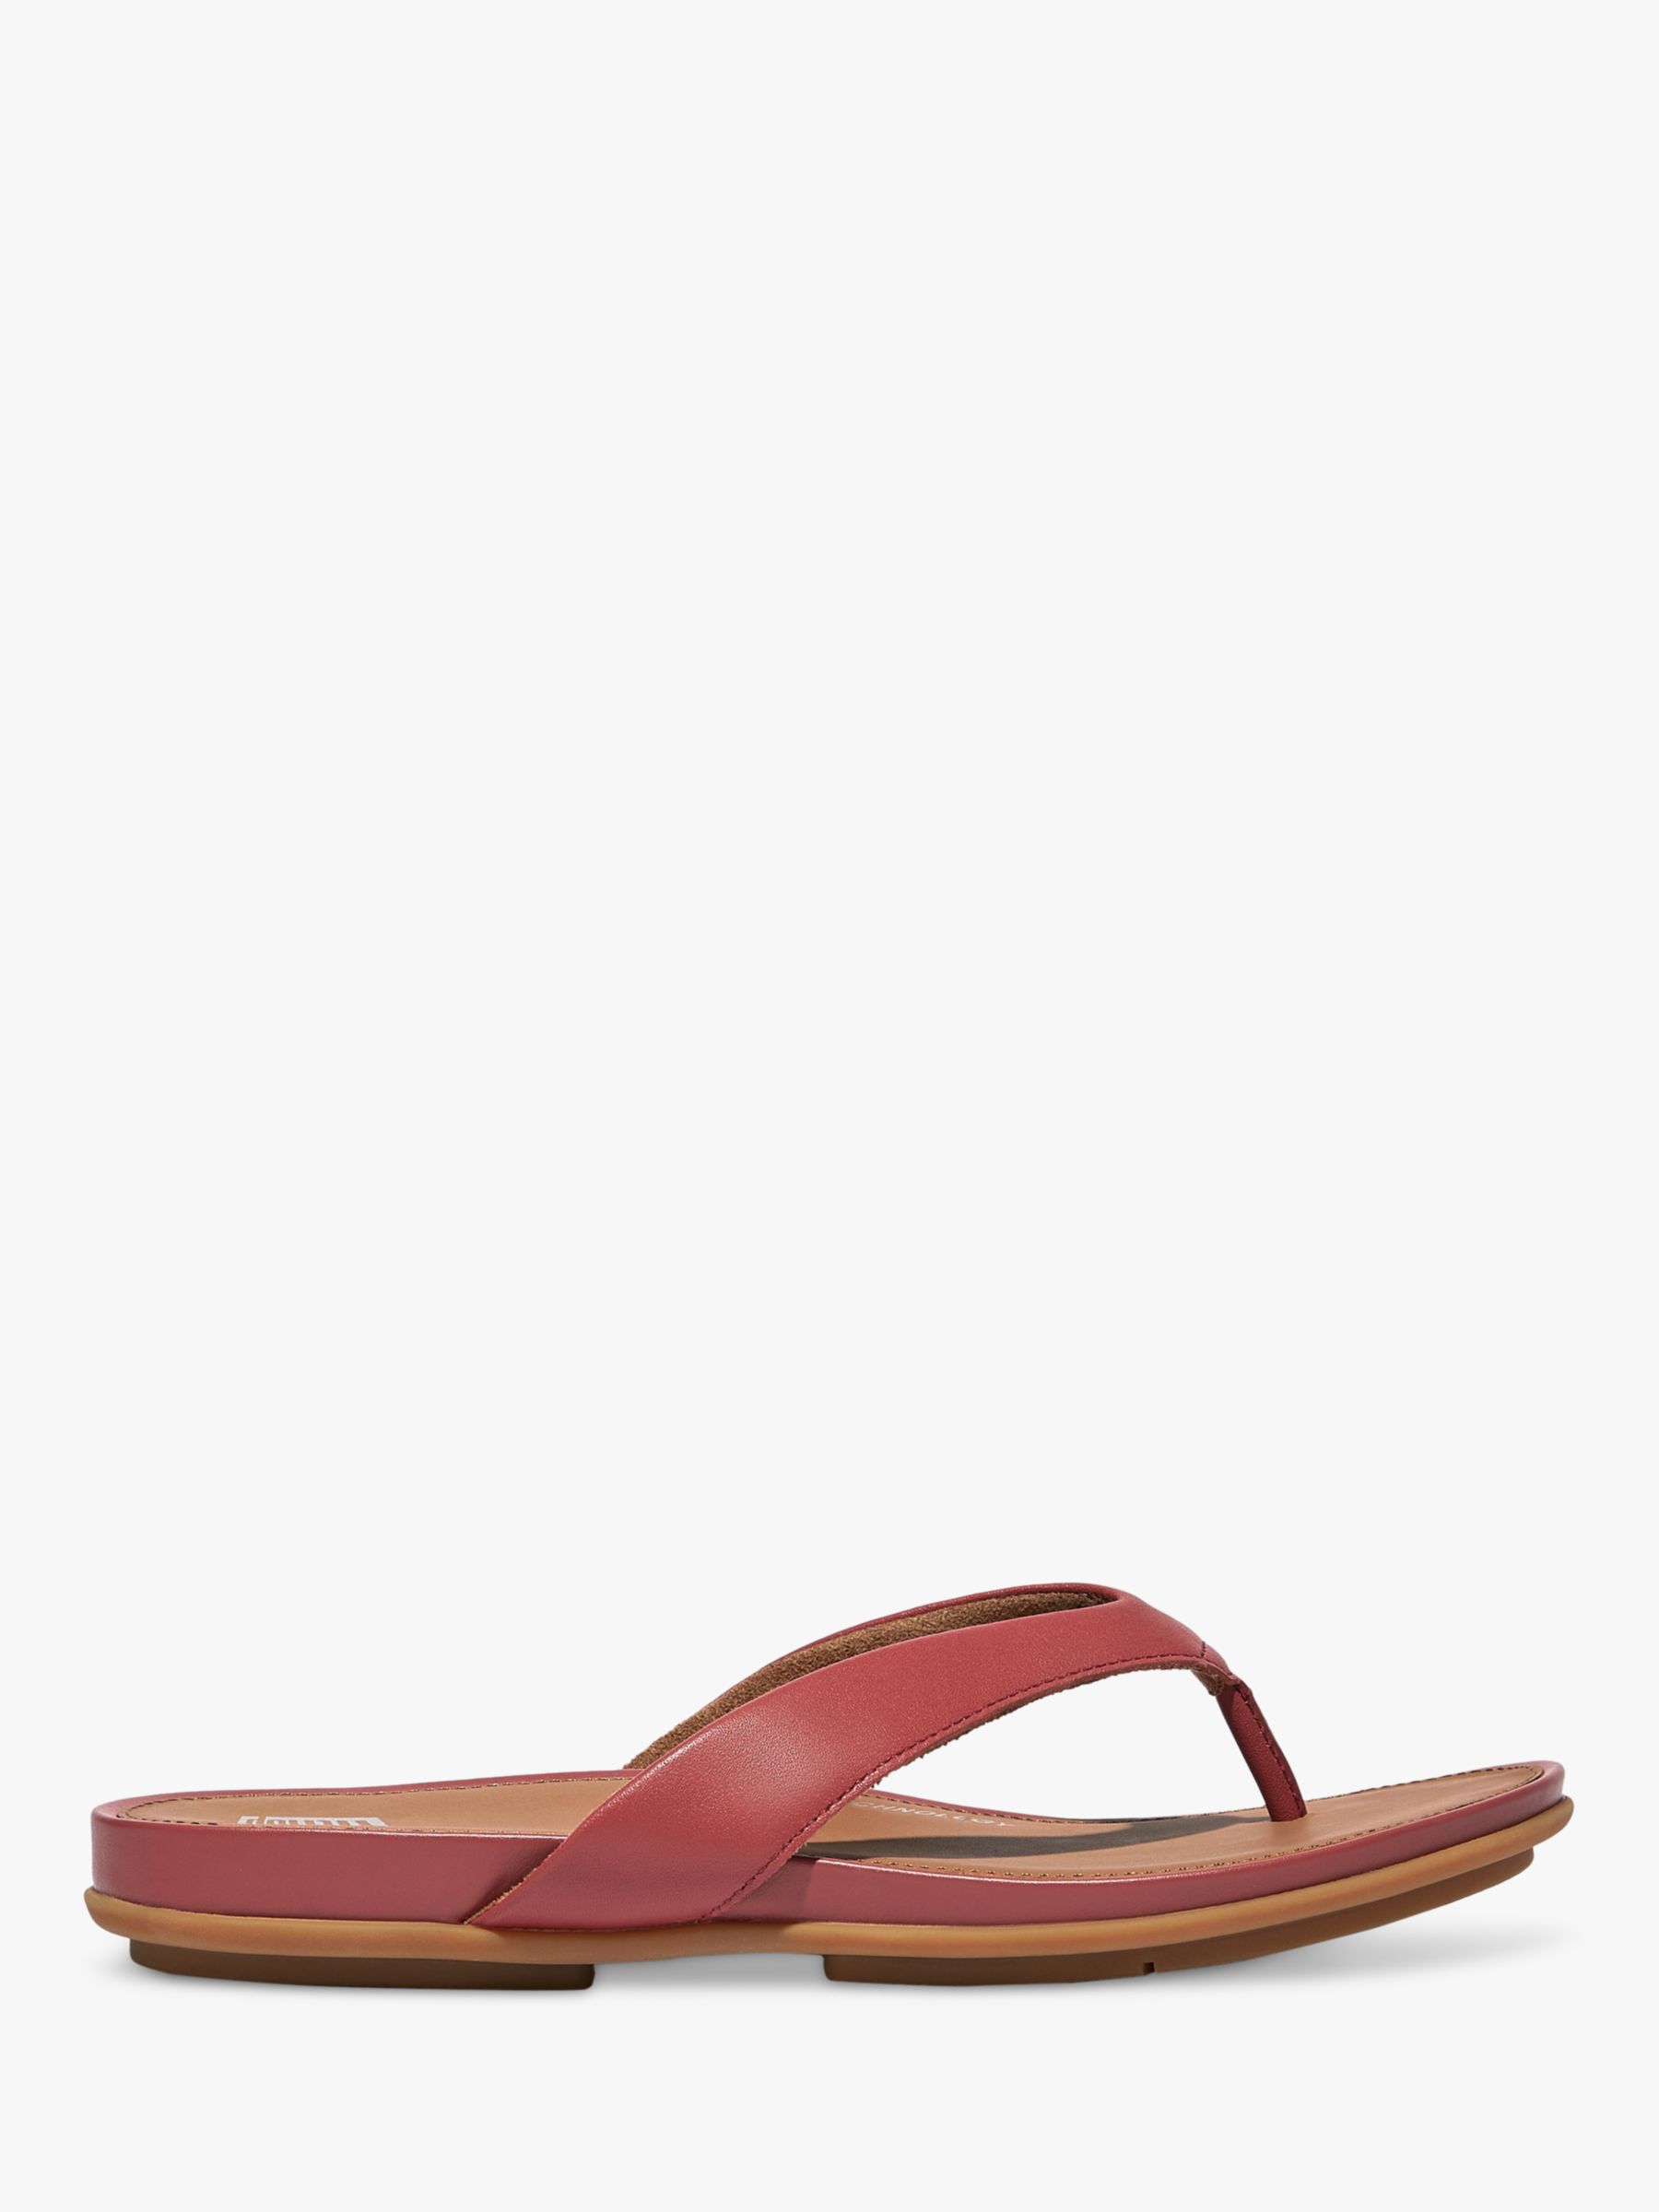 FitFlop Gracie Leather Flip Flops, Dusky Red at John Lewis & Partners